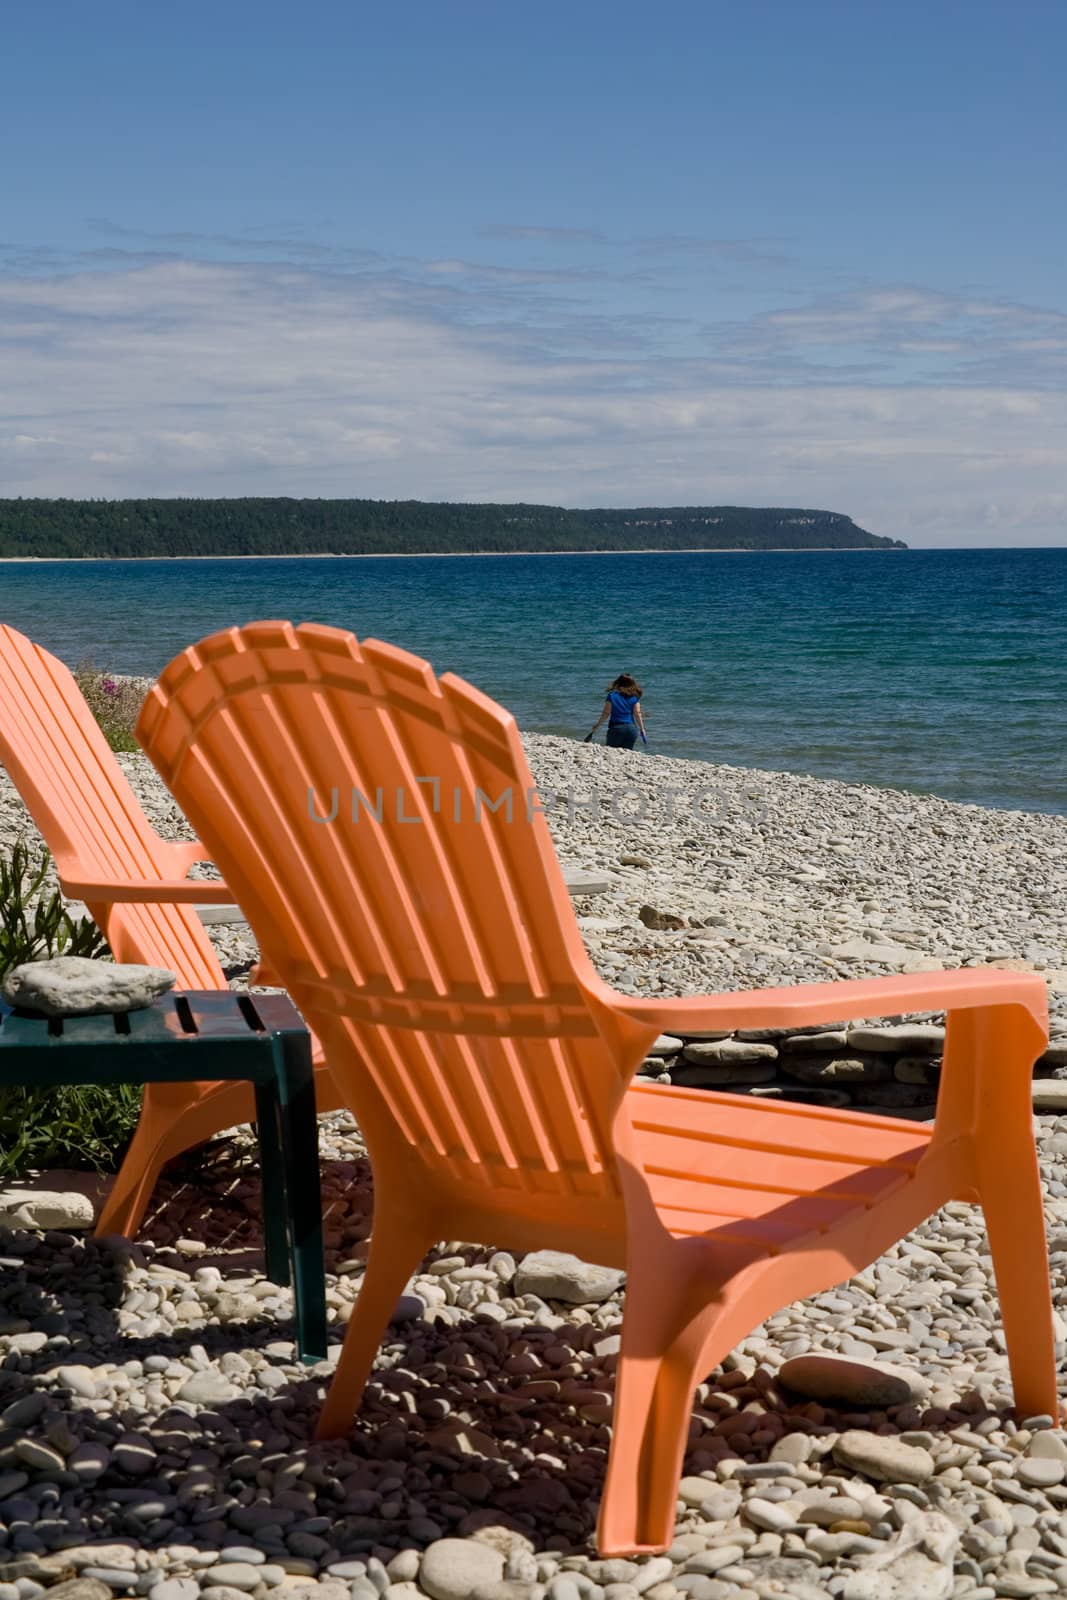 A set of two orange deck chairs with a rocky beach background, low cloud cover, and blue sky.